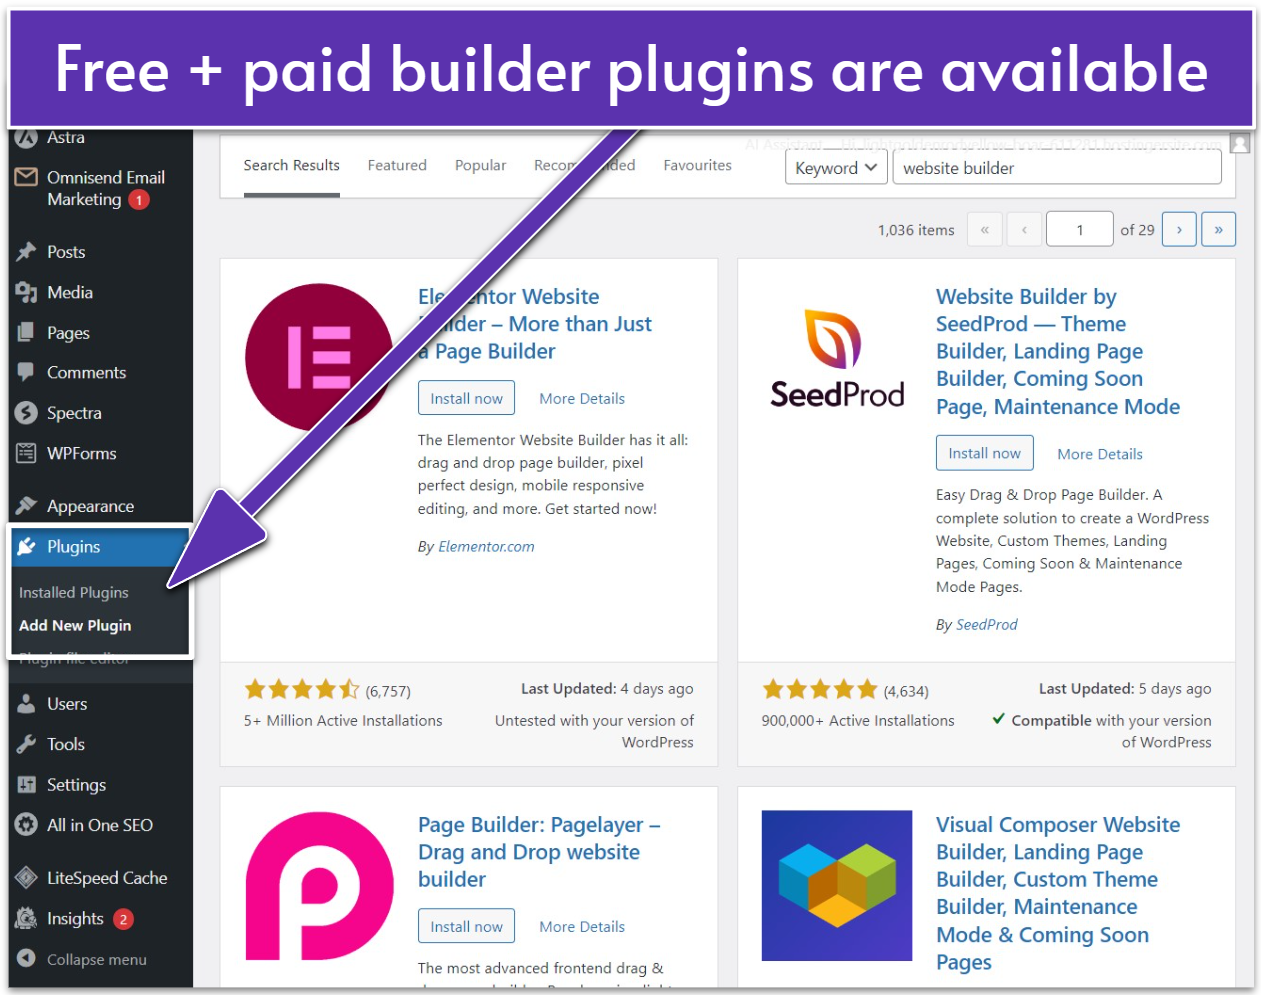 Free and paid website builder plugins available in WordPress under the Plugins > Add New Plugin menu